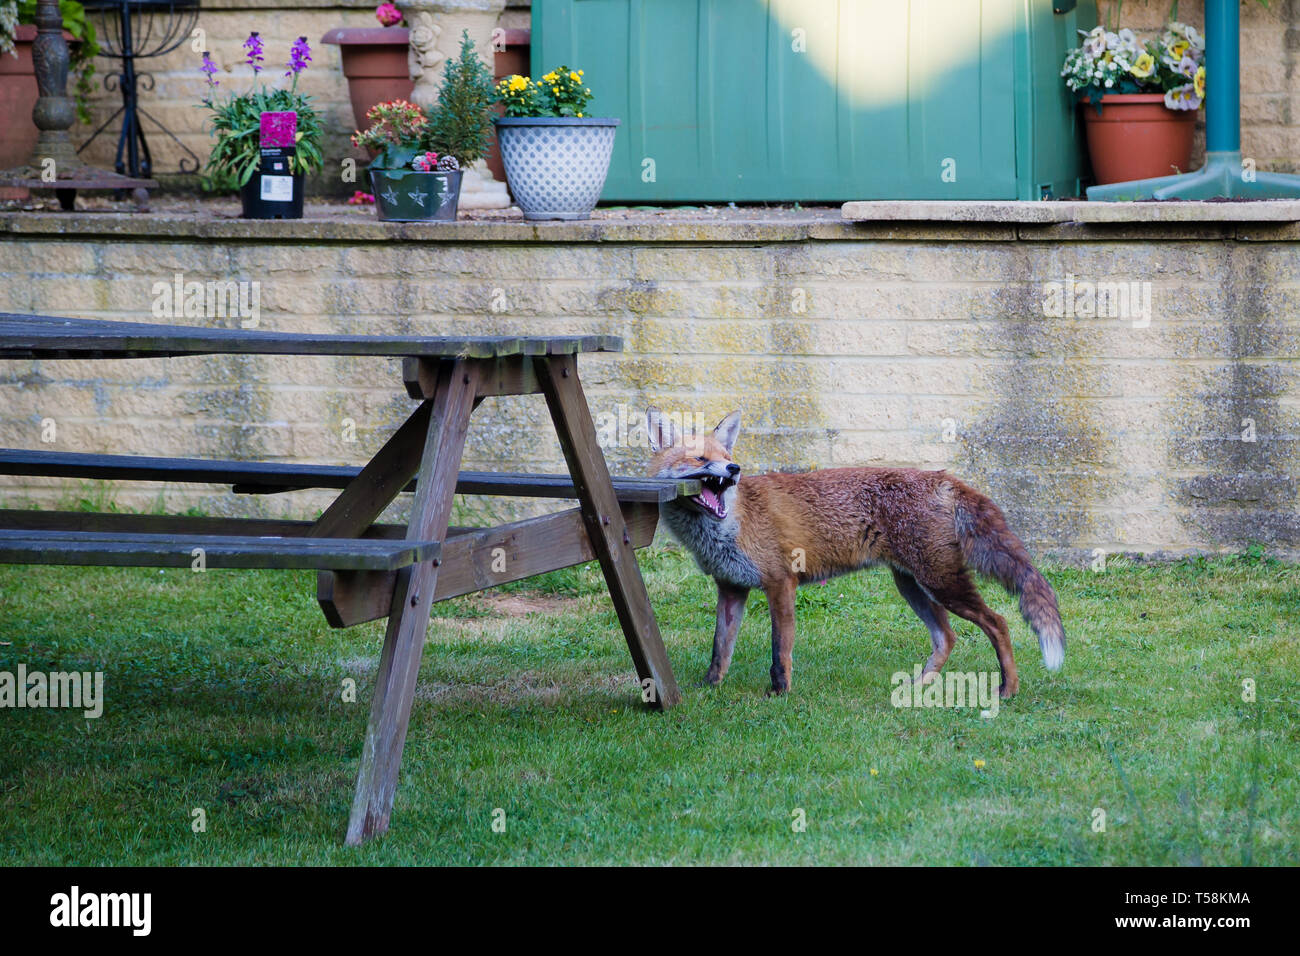 Gravesend, Kent. UK. A fox in an English garden starts to chew the wooden seat of a picnic bench. Stock Photo